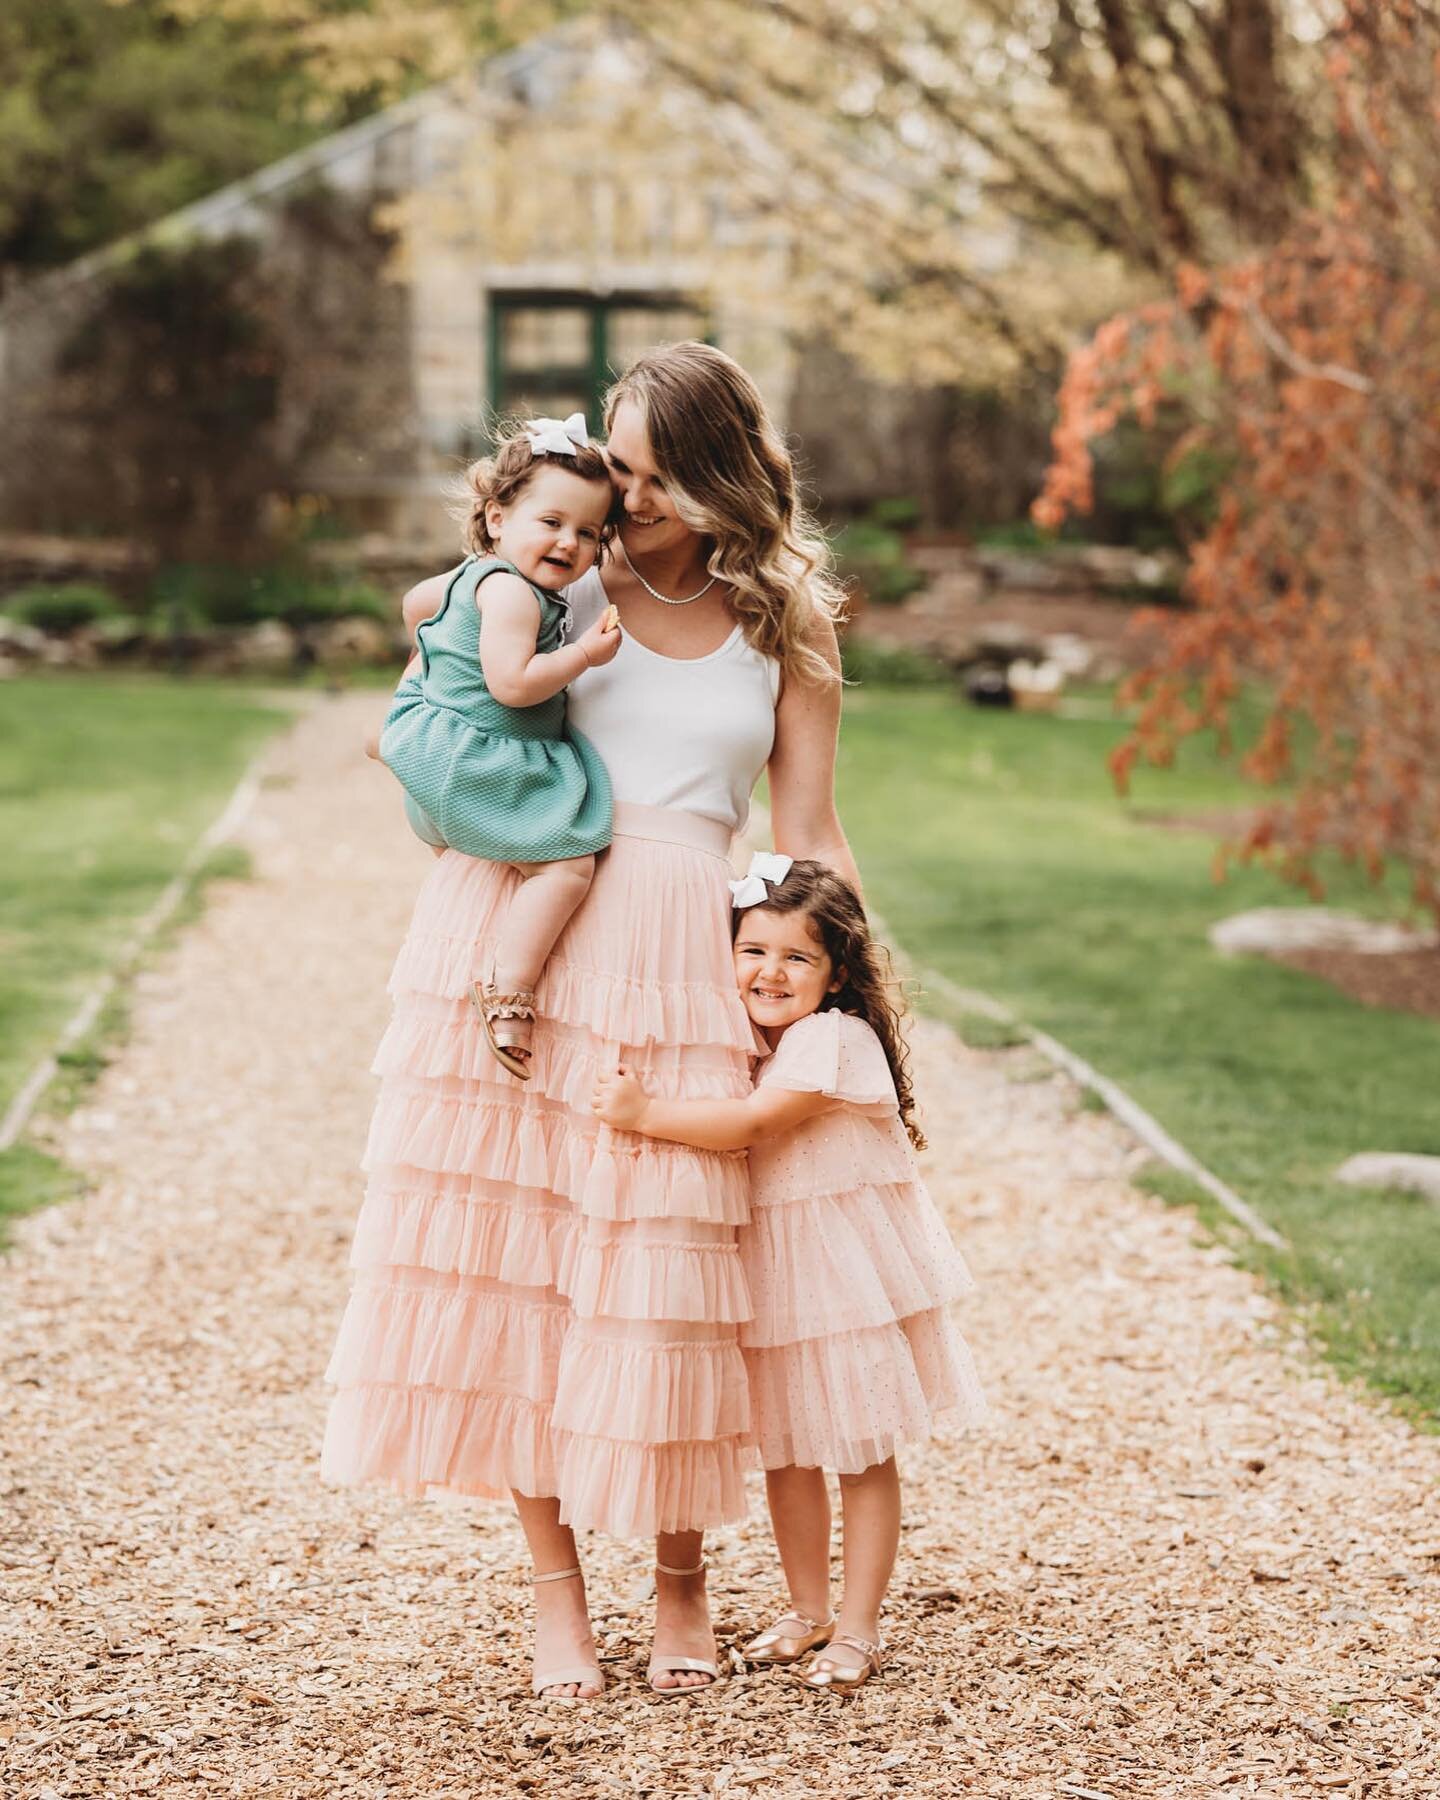 Friends, I only have a few full family sessions left open for the YEAR. 😳🥰

Let me tell you something:

You all have helped me build this thing from me + my entry level camera into a real live business that I am proud of, and that helps support my 